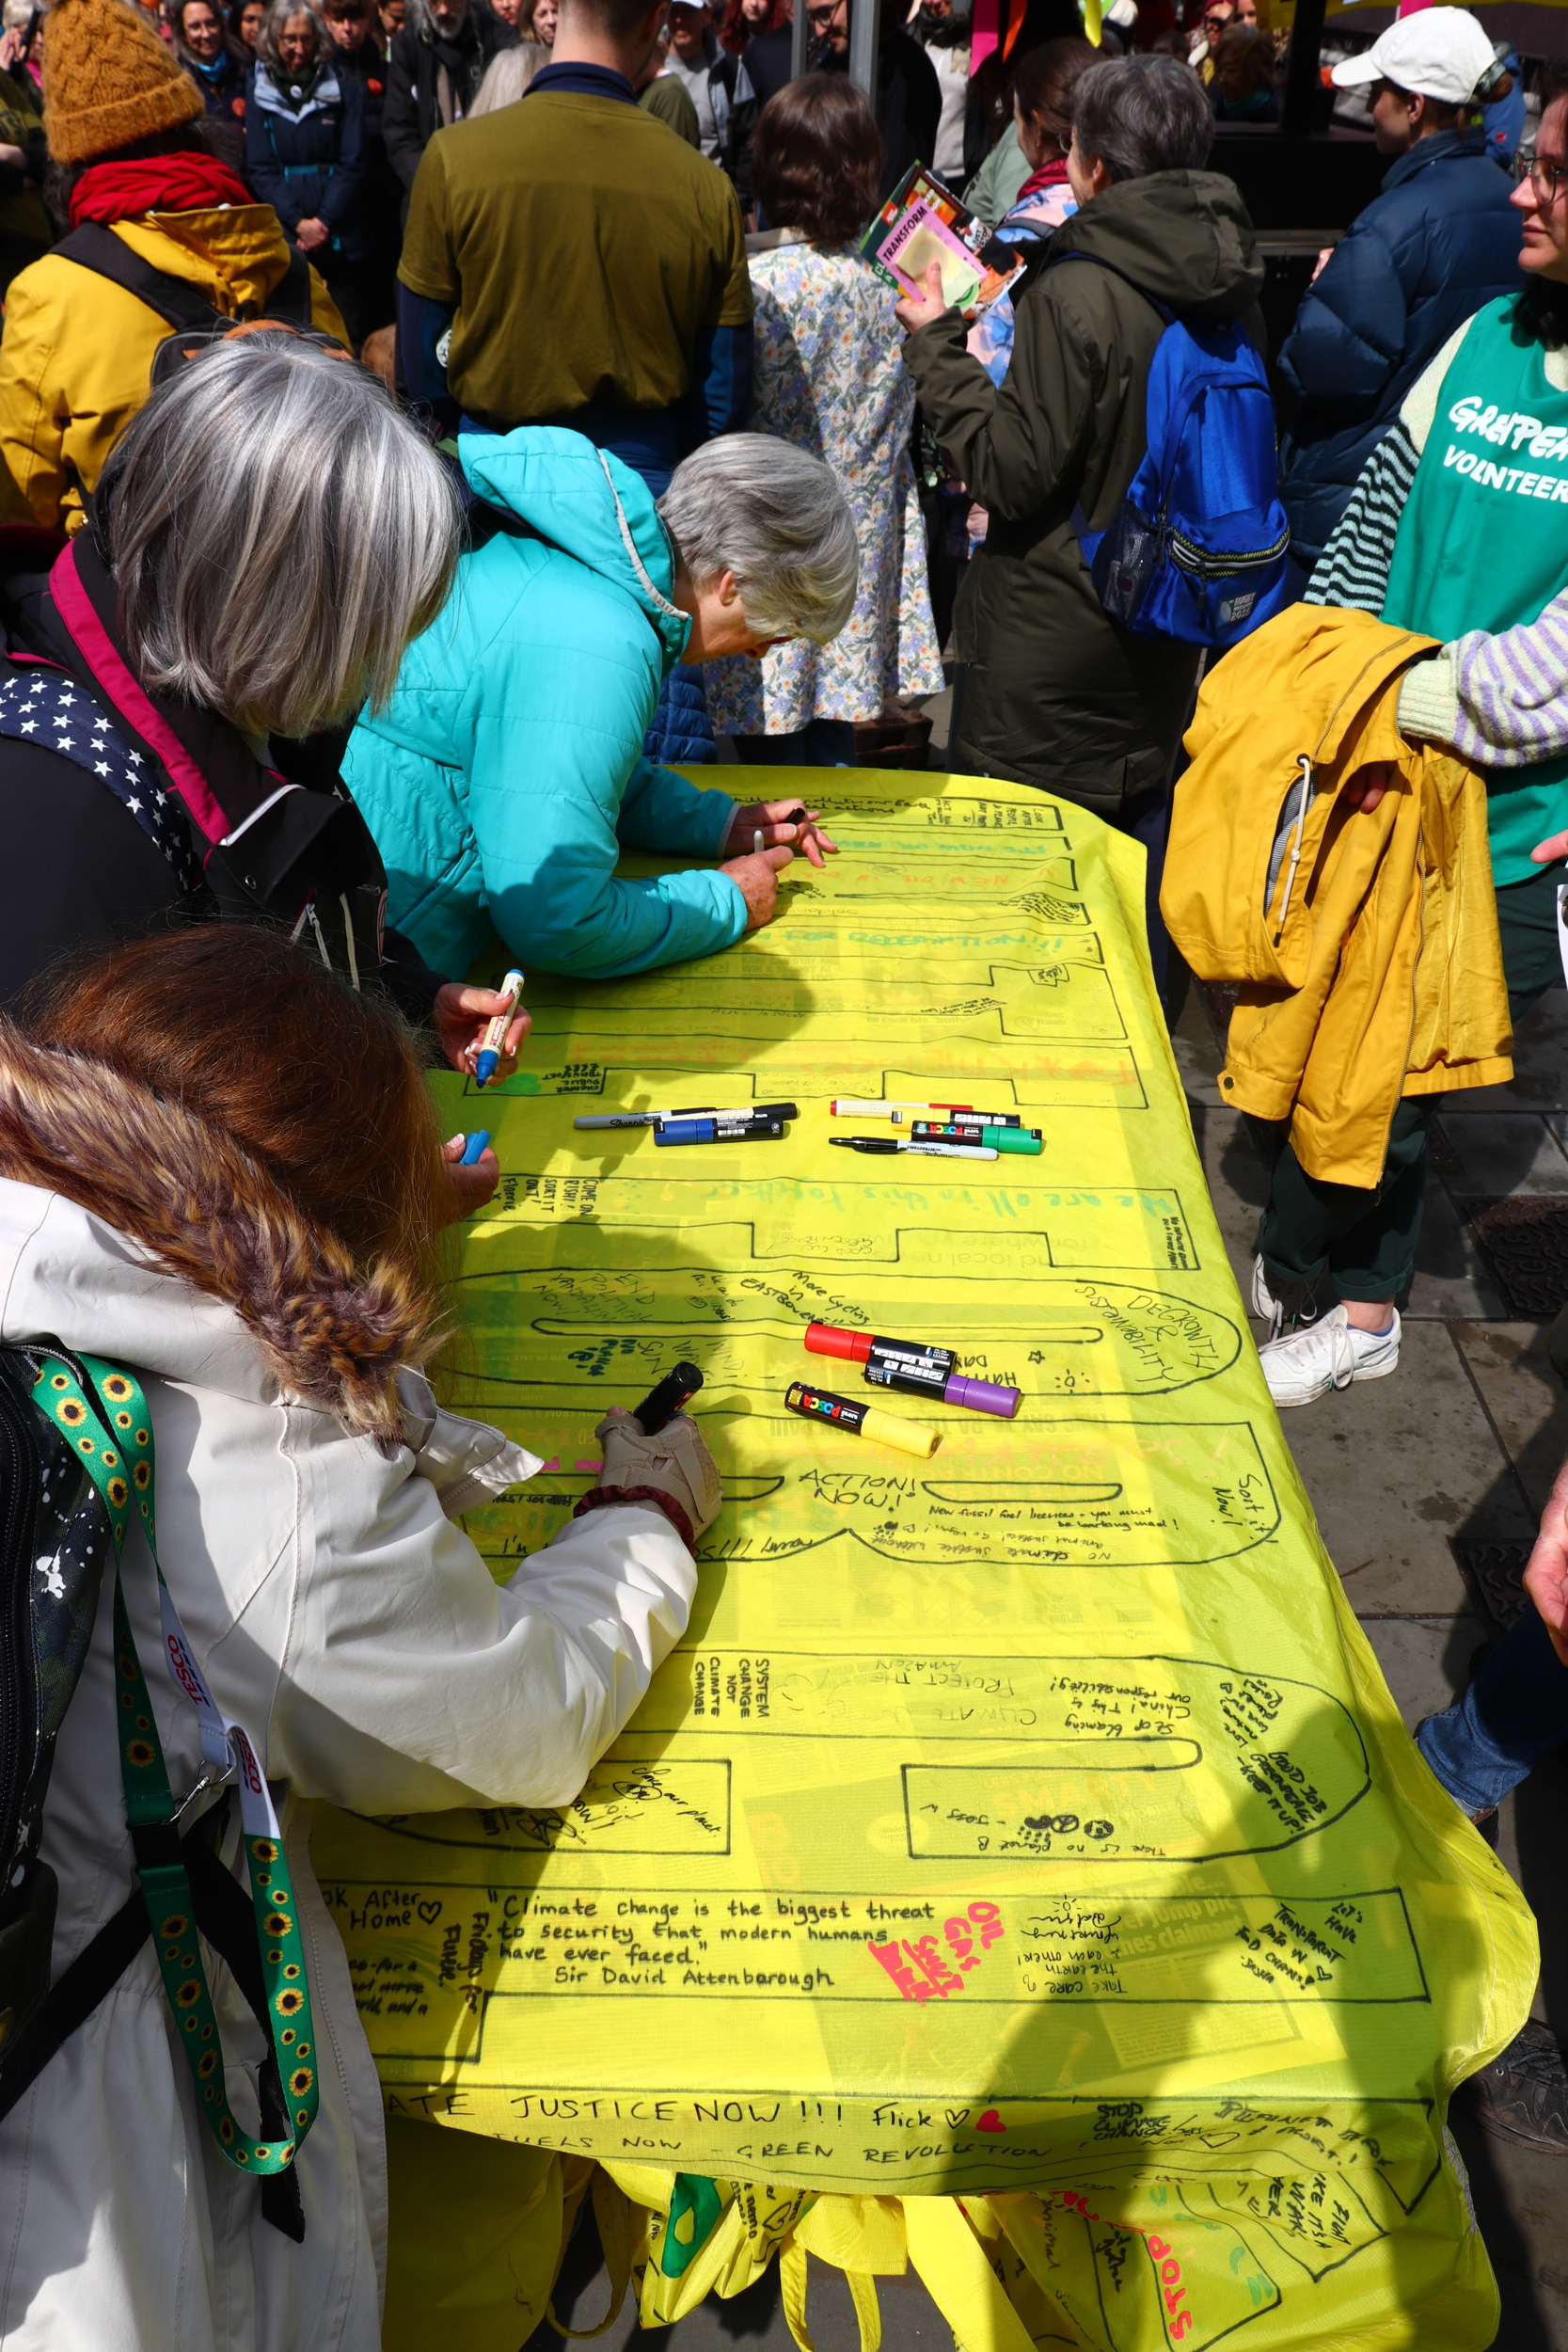 People writing on a large yellow banner laid out on a trestle table.